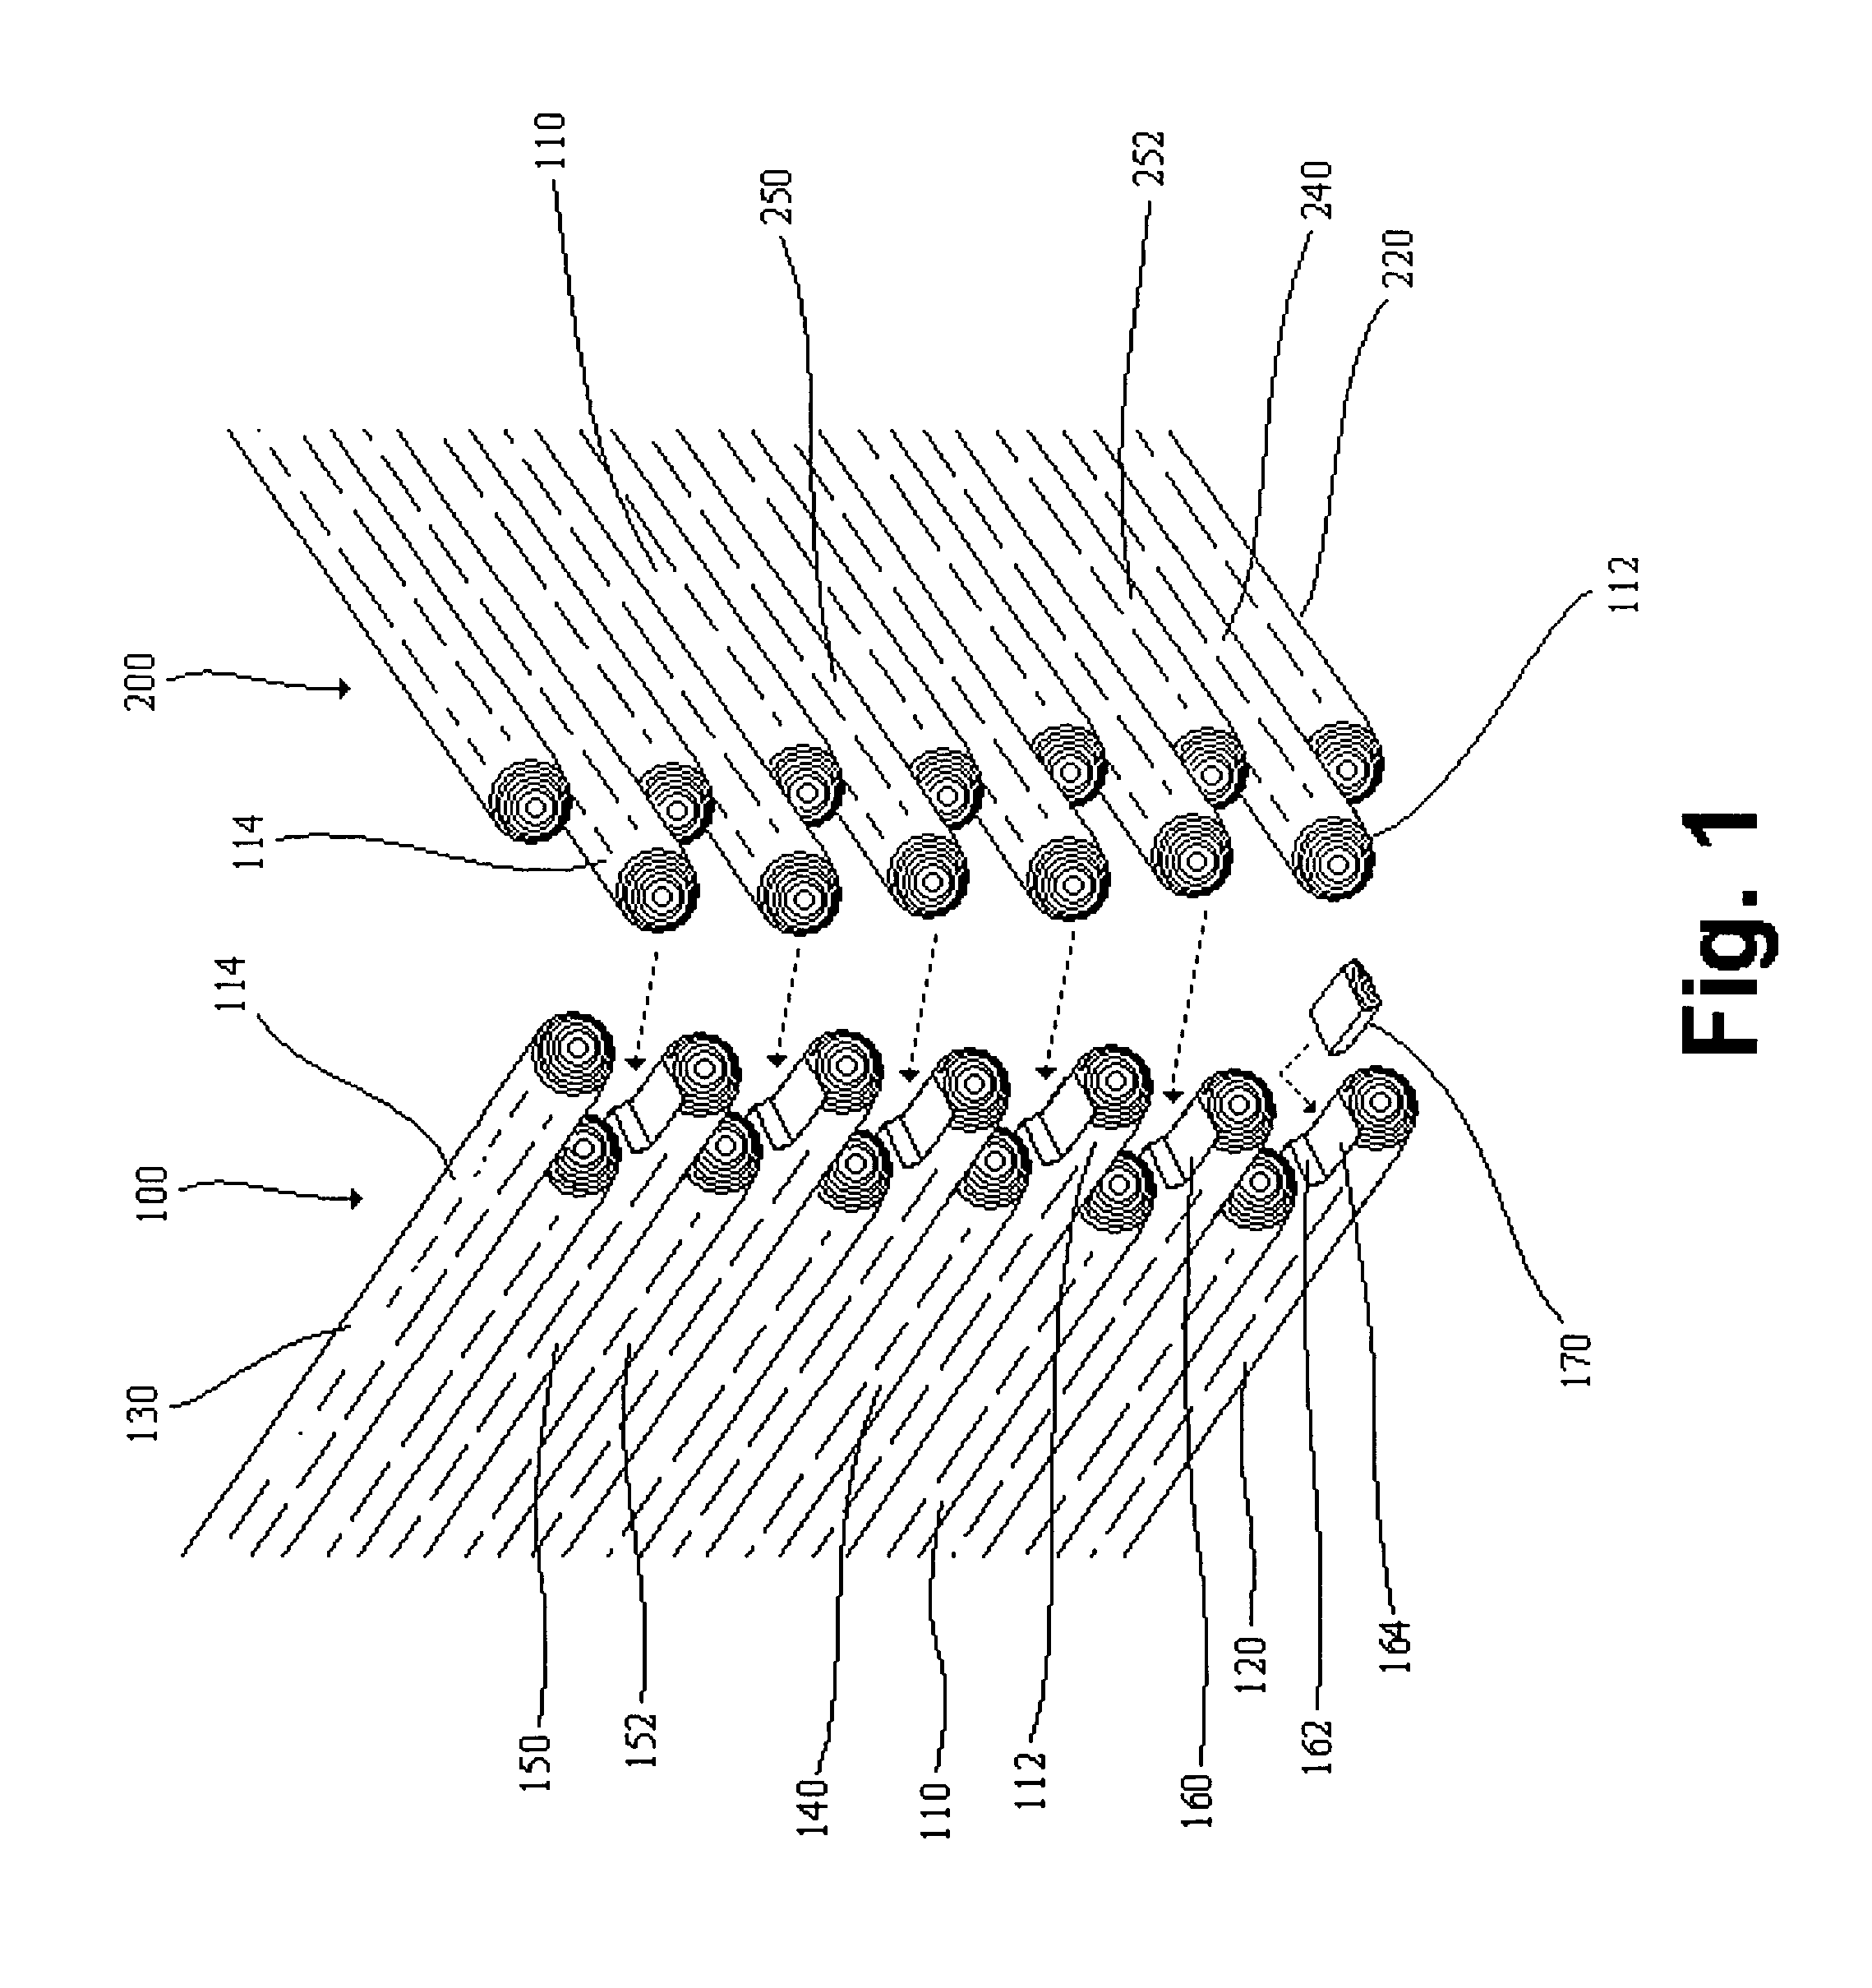 Log structure and method for constructing same